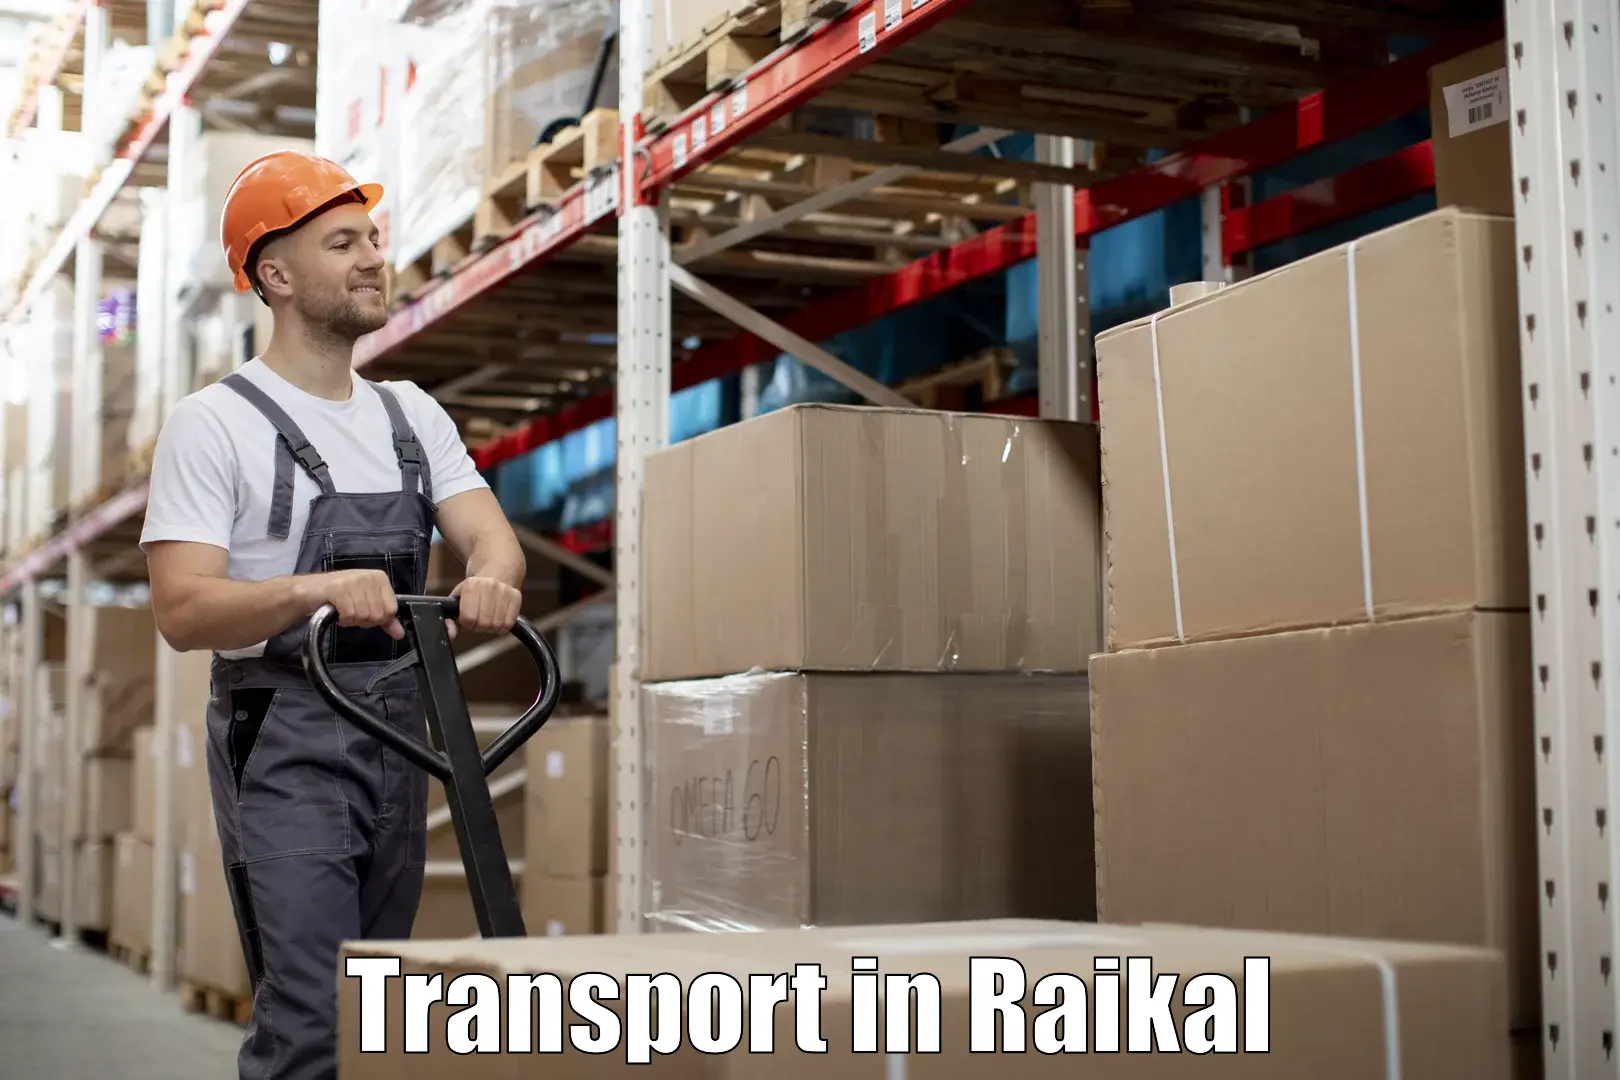 Daily transport service in Raikal